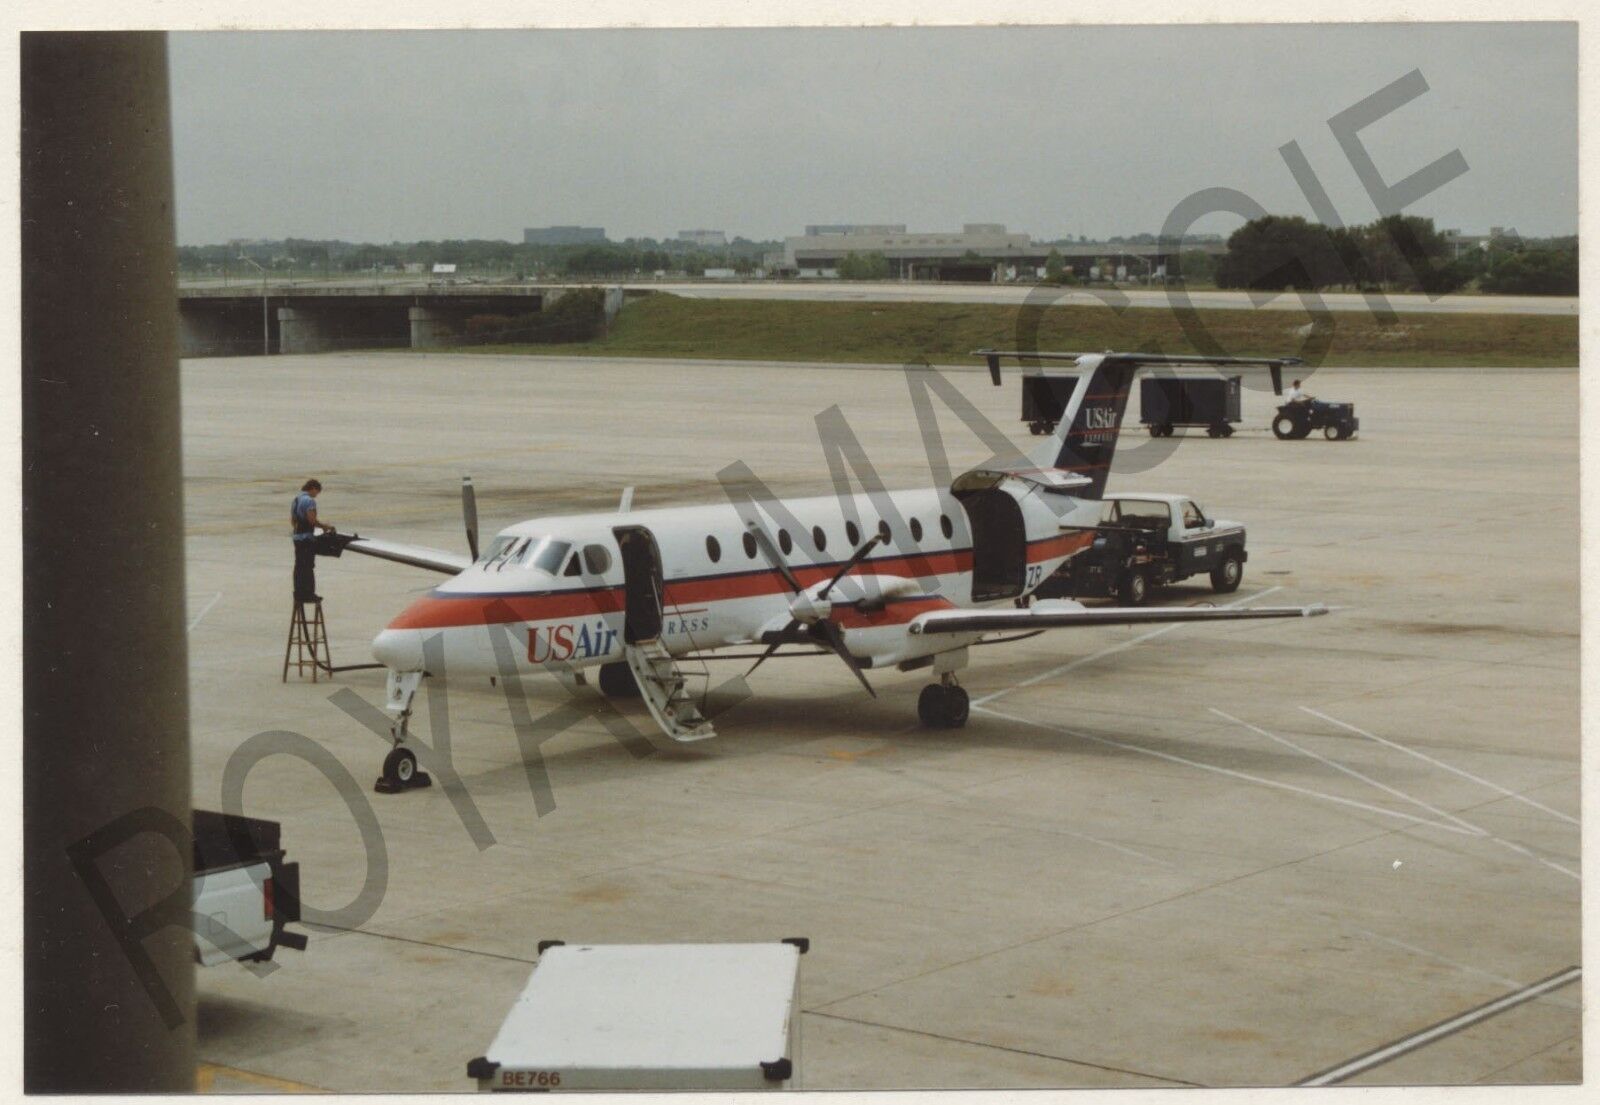 Colour print of US Air Express Beech 1900C N13ZR at Tampa FL in 1992